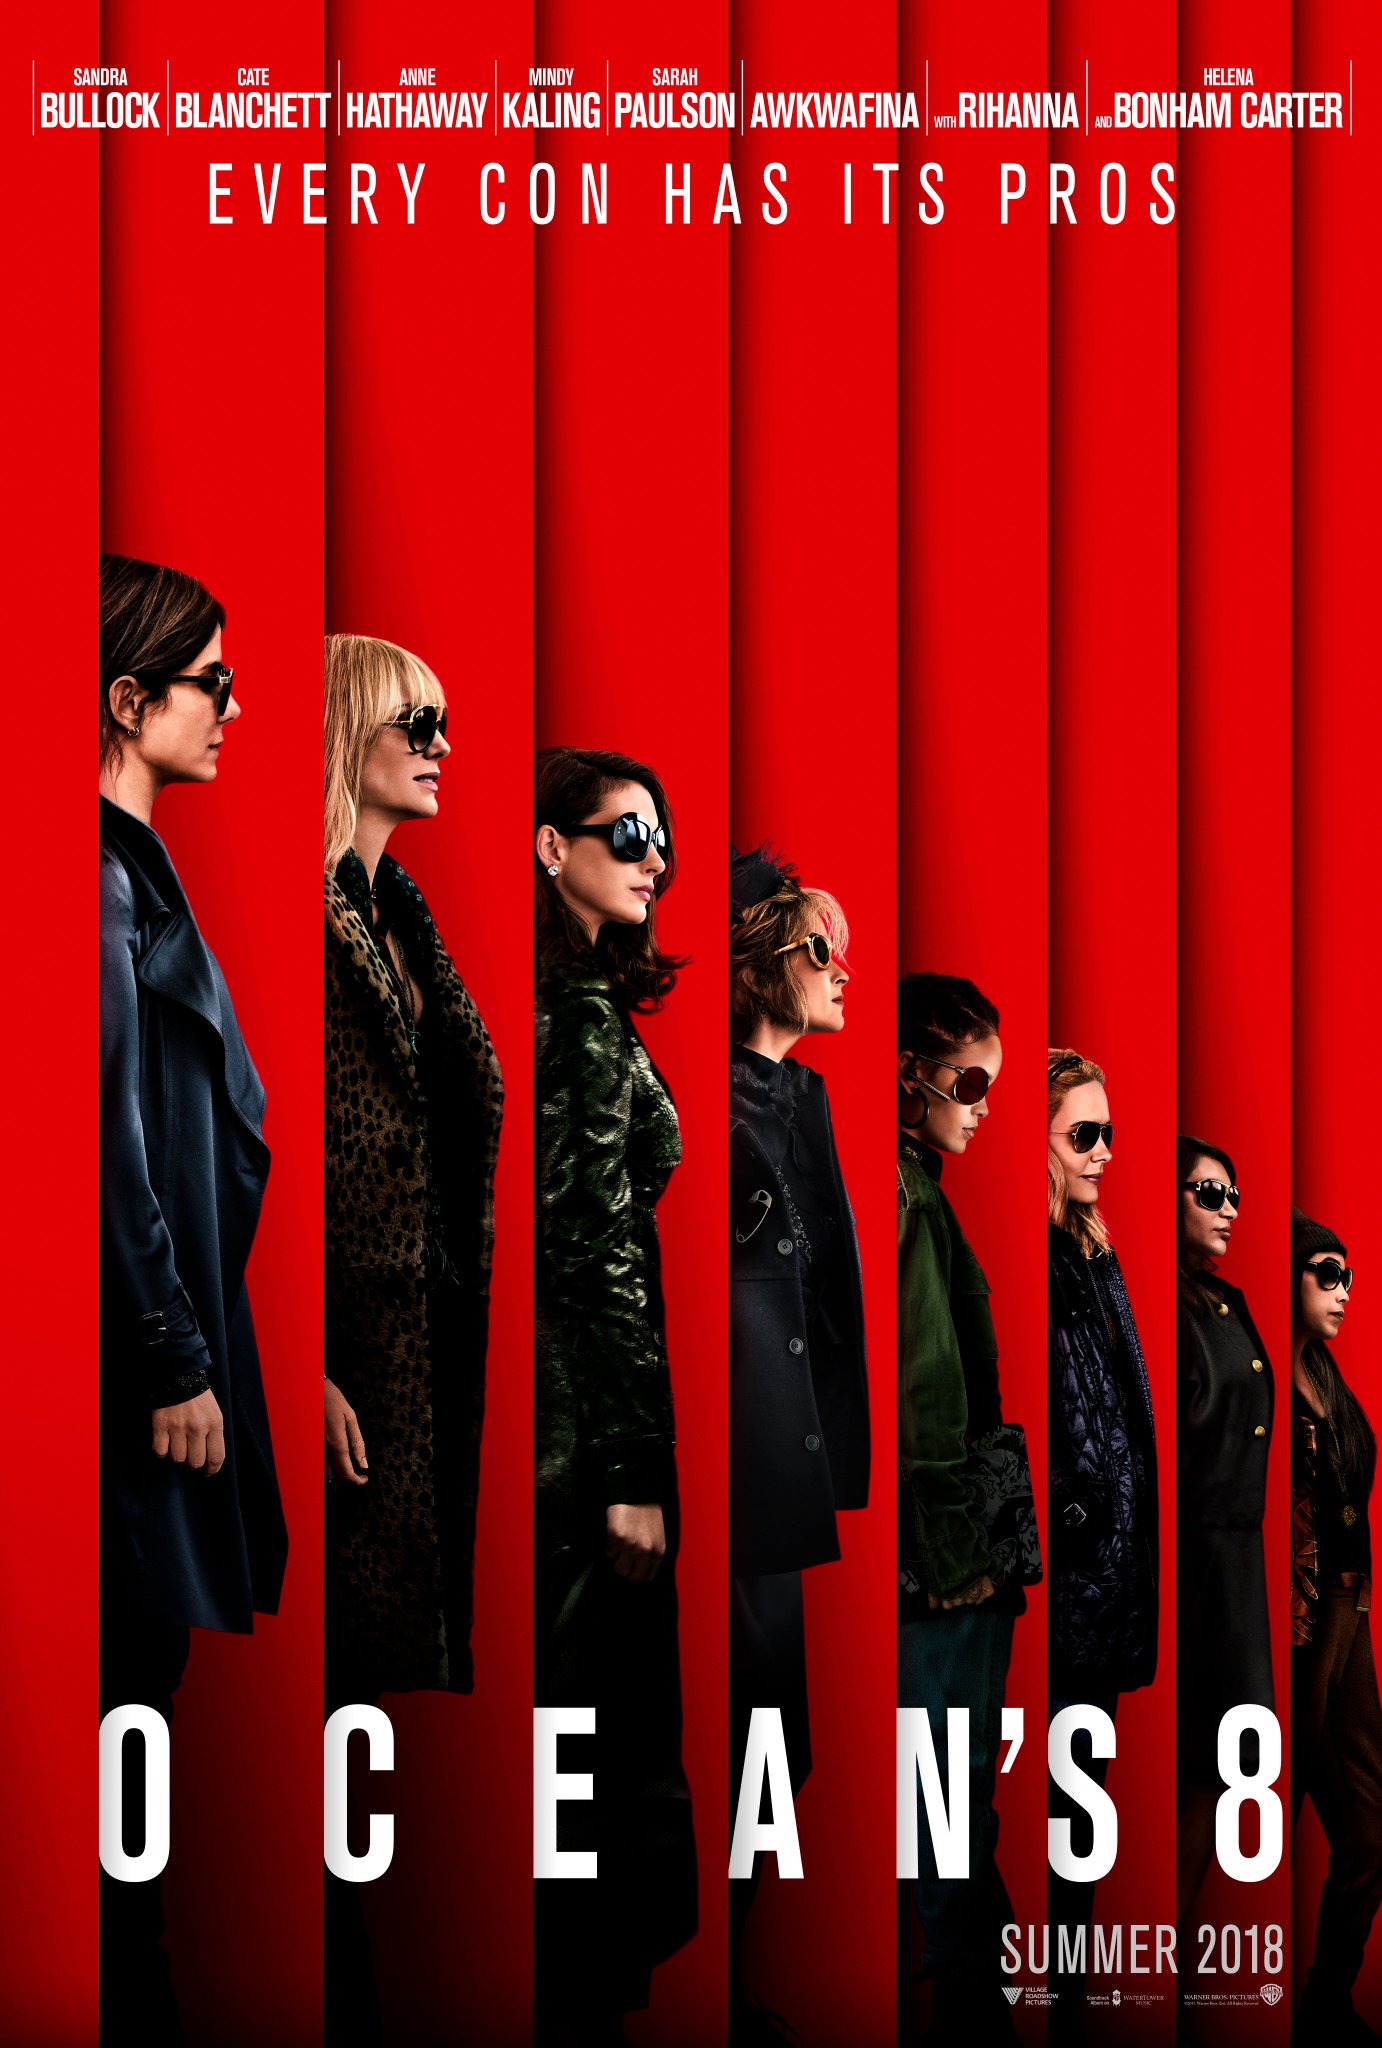 First Poster for Ocean's 8